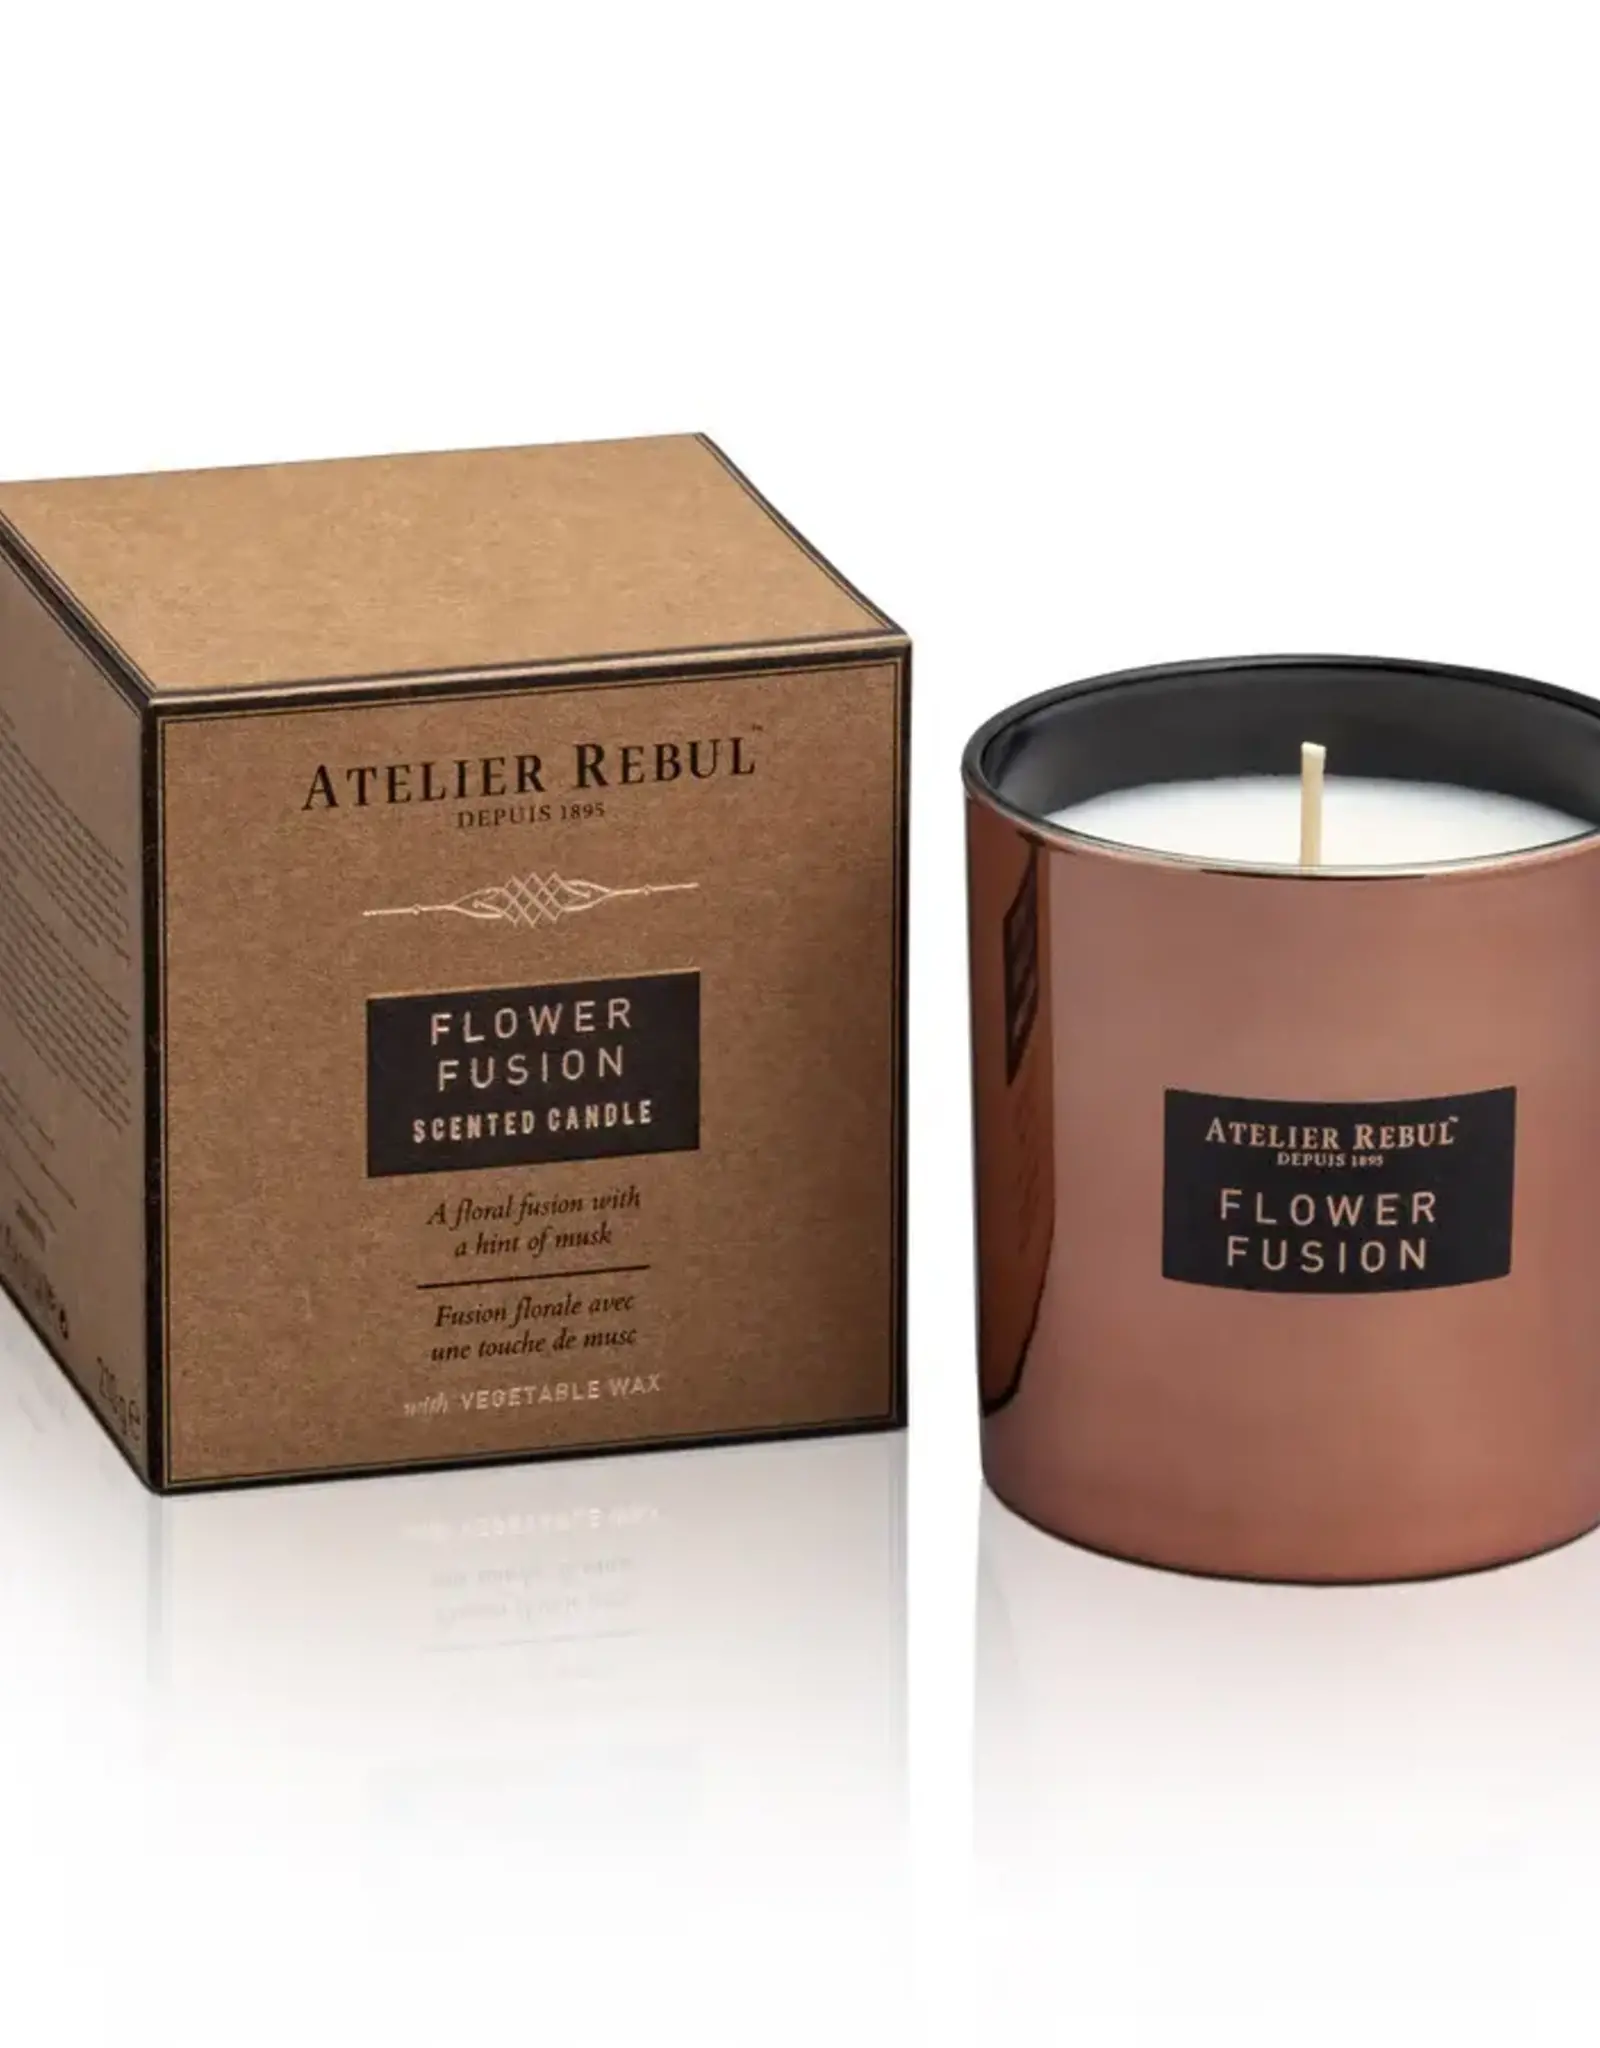 Atelier Rebul Atelier rebul - Flower fusion scented candle 210gr